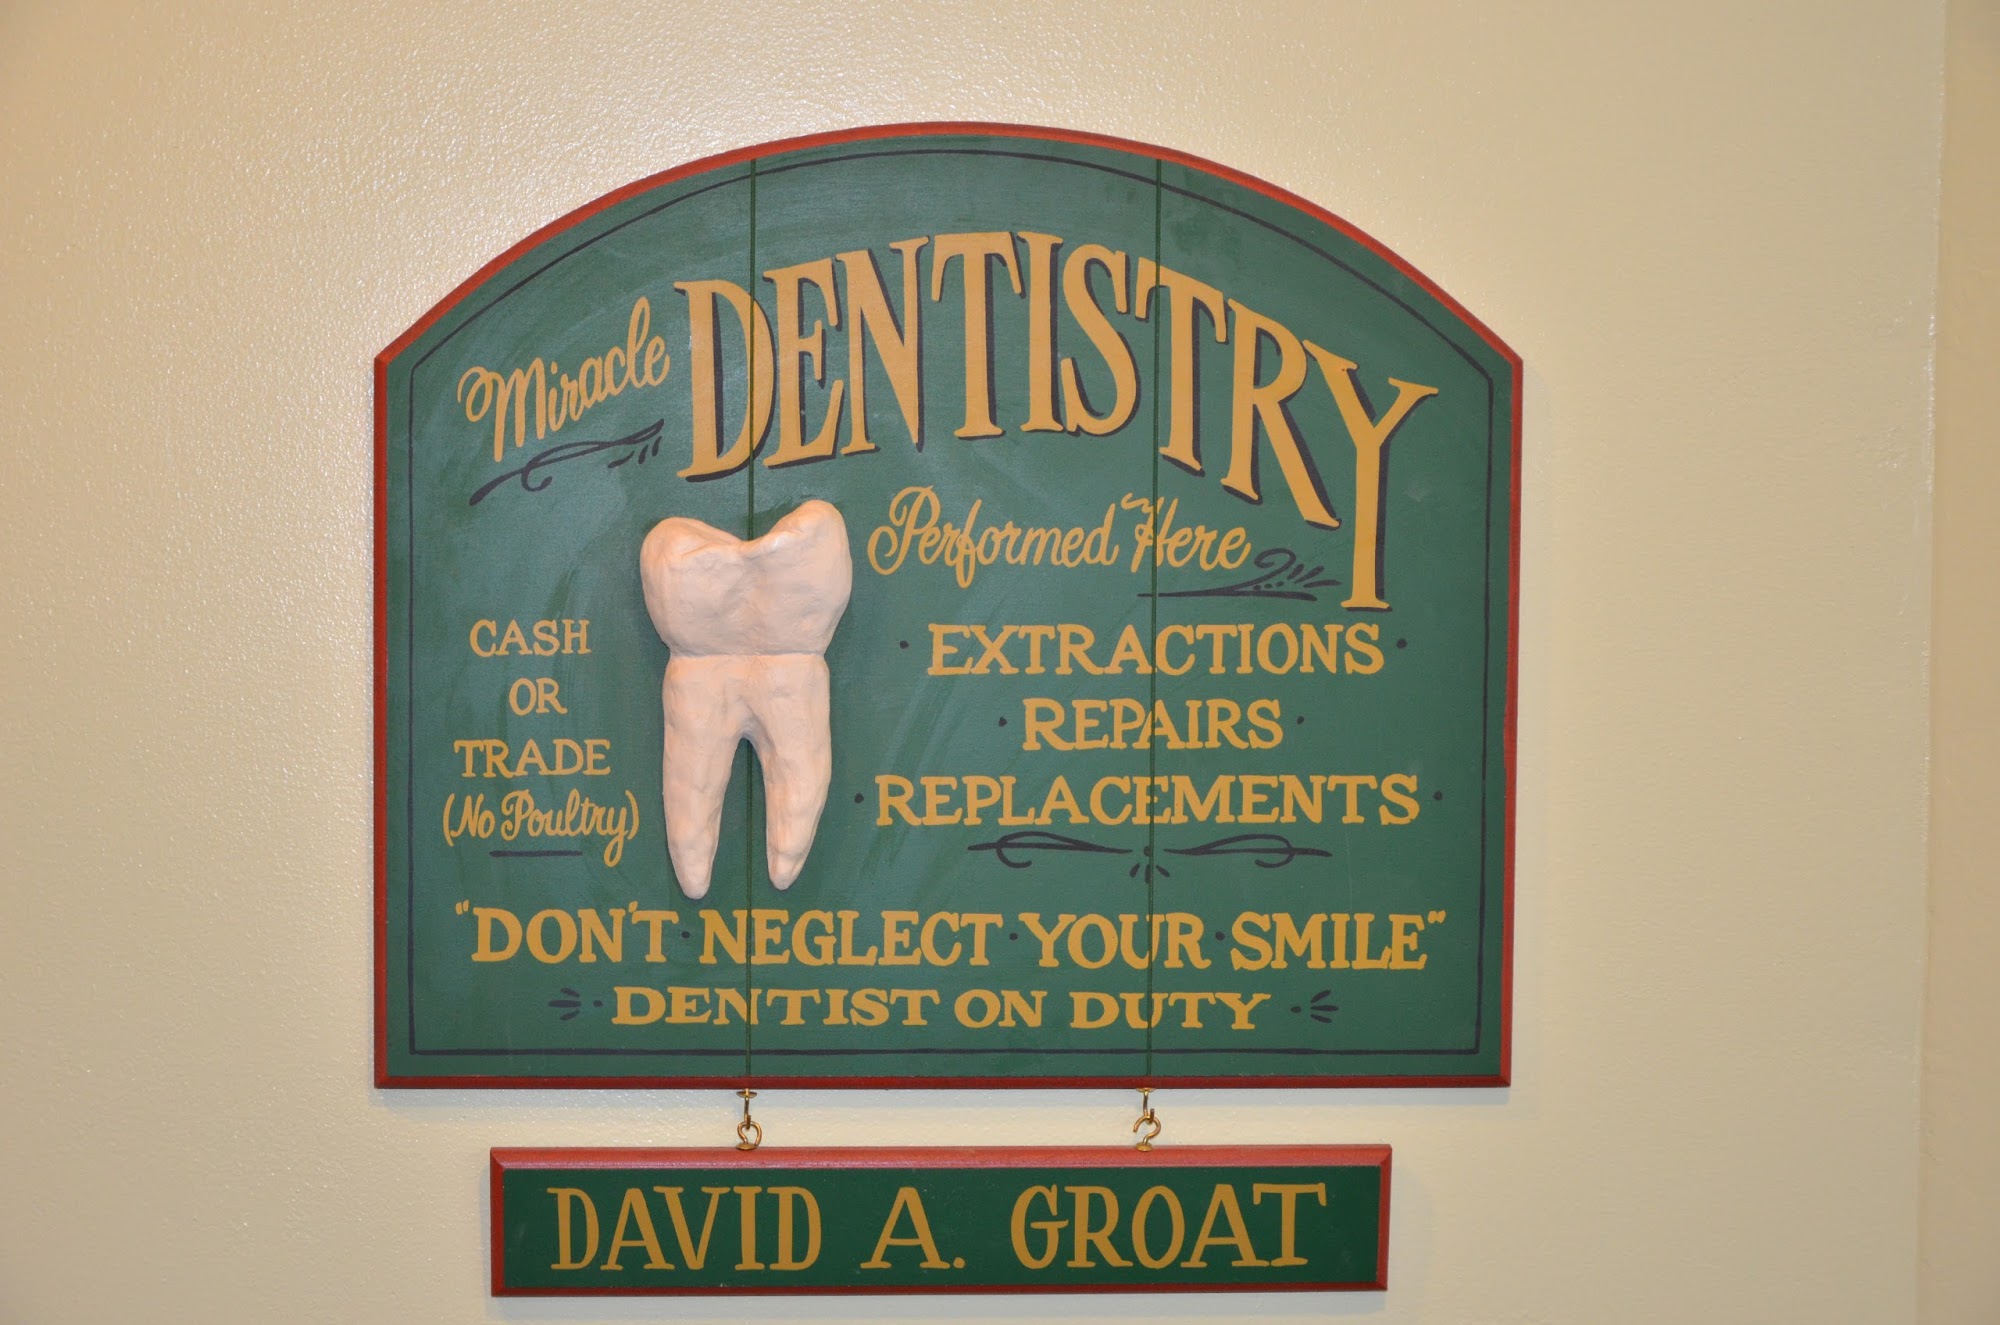 David A. Groat, DDS 571 Stanislaus Ave, Angels Camp California 95222